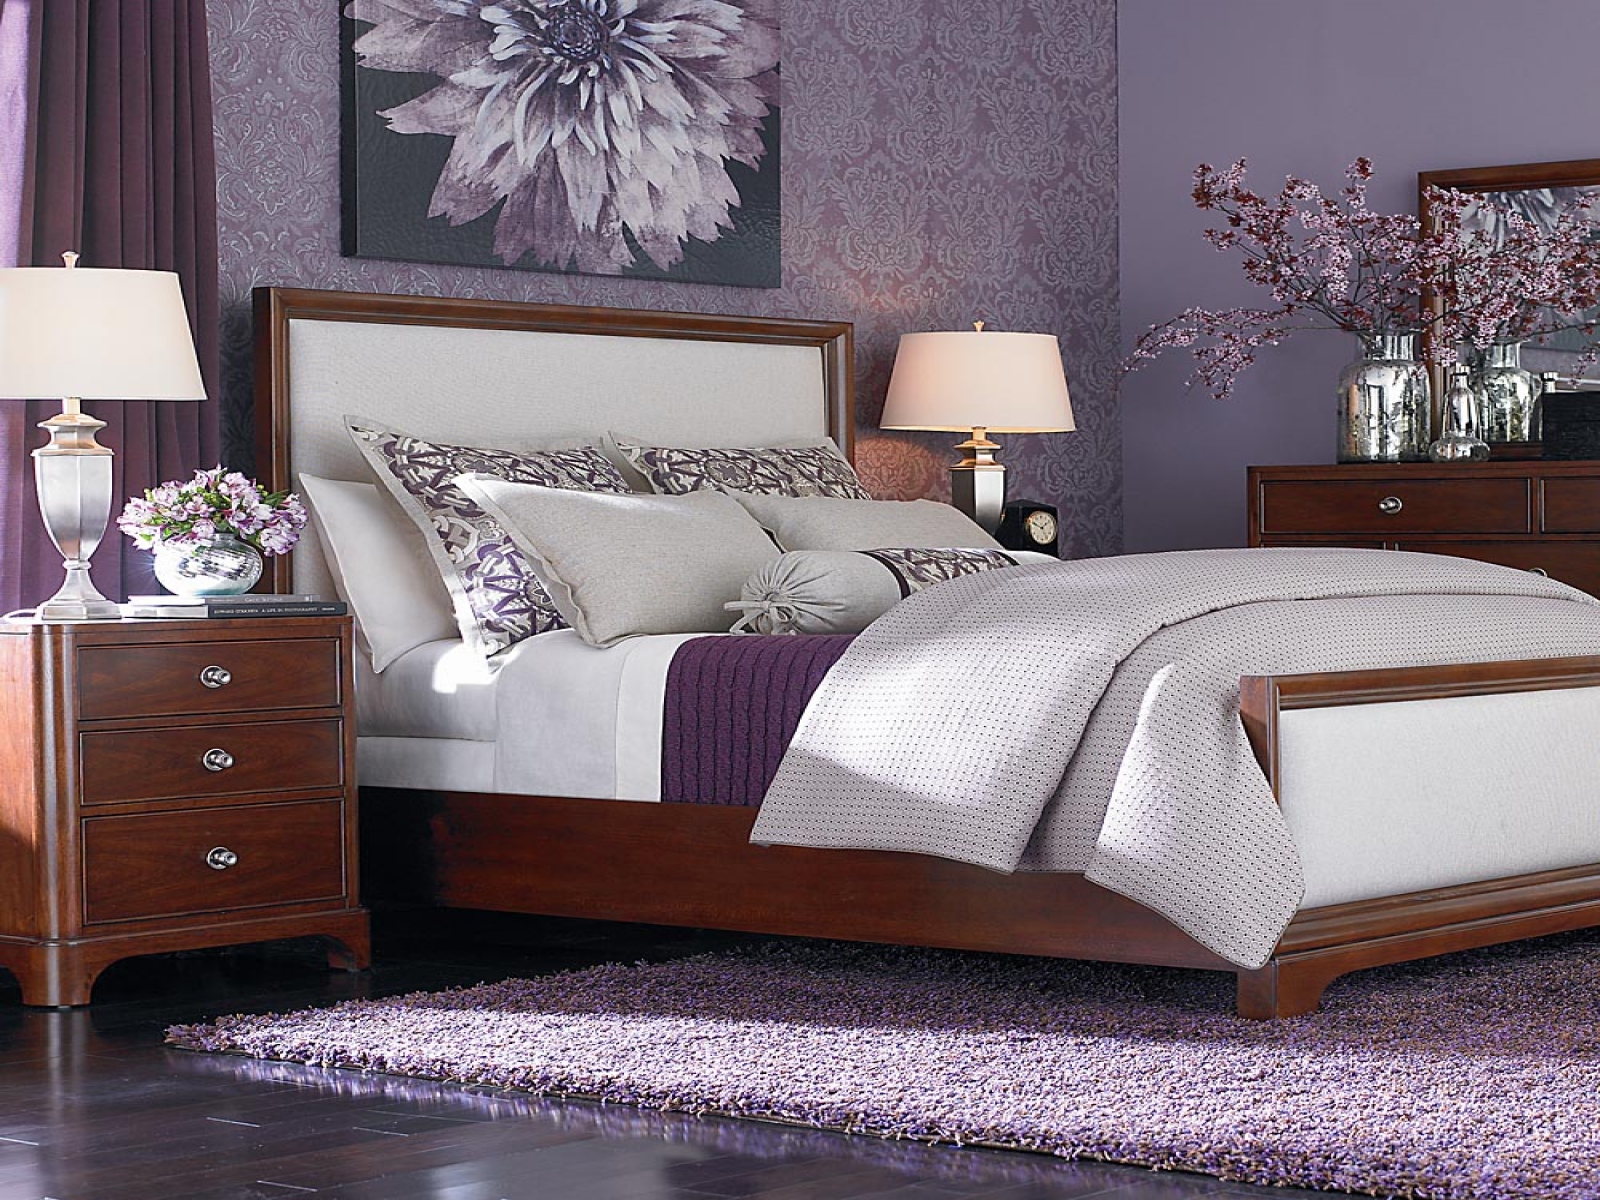 bedroom furniture ideas for small bedrooms photo - 2